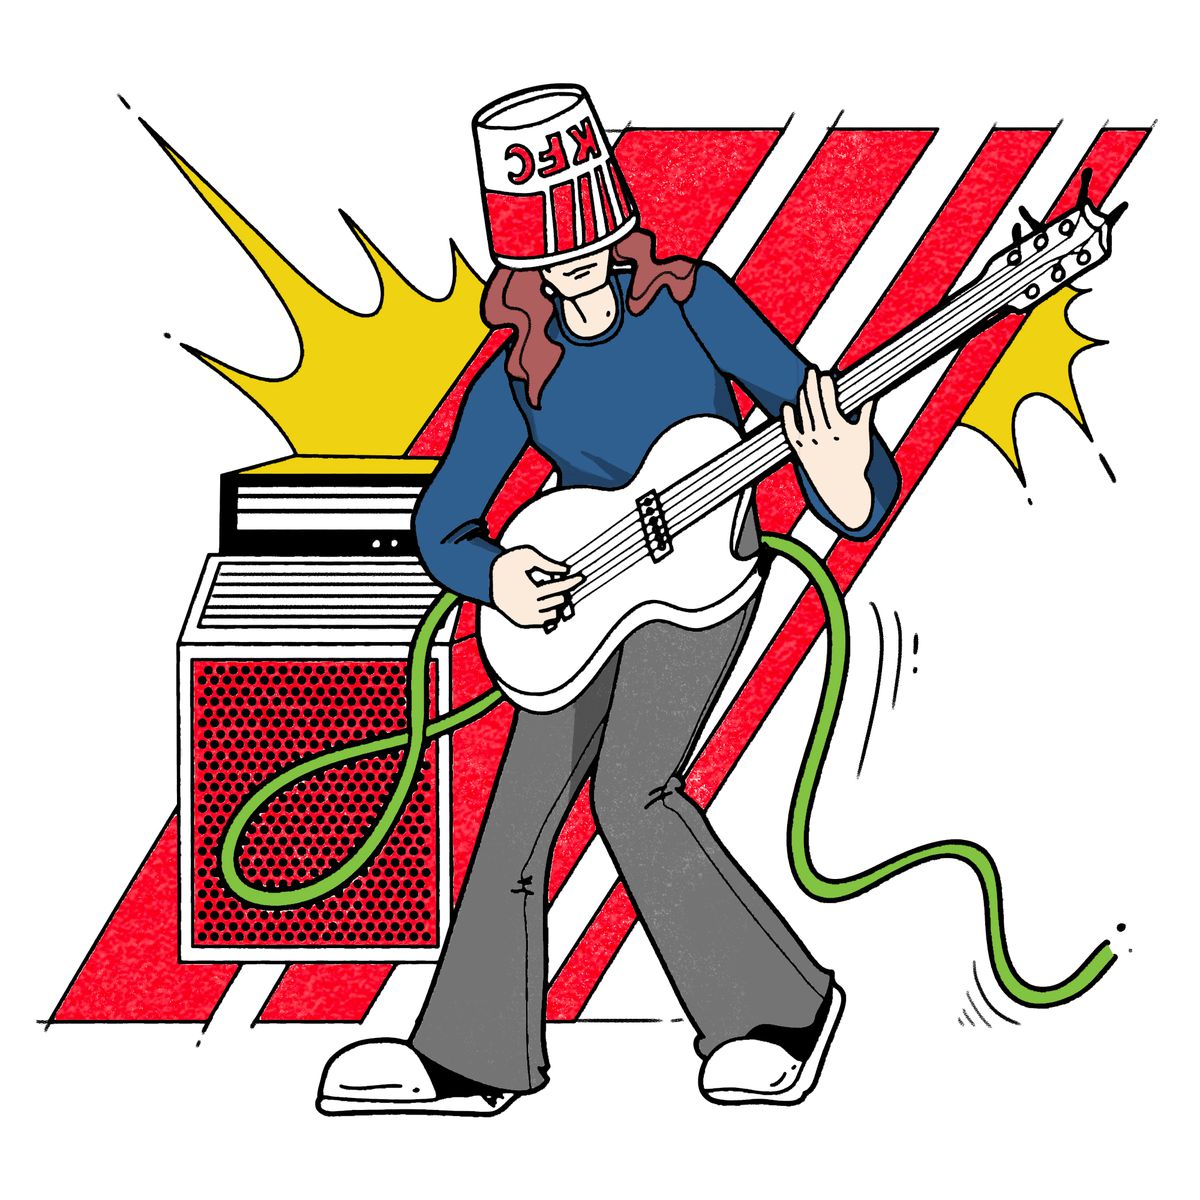 An illustration of Buckethead, the guitarist who wears a chicken bucket on his head playing the guitar.